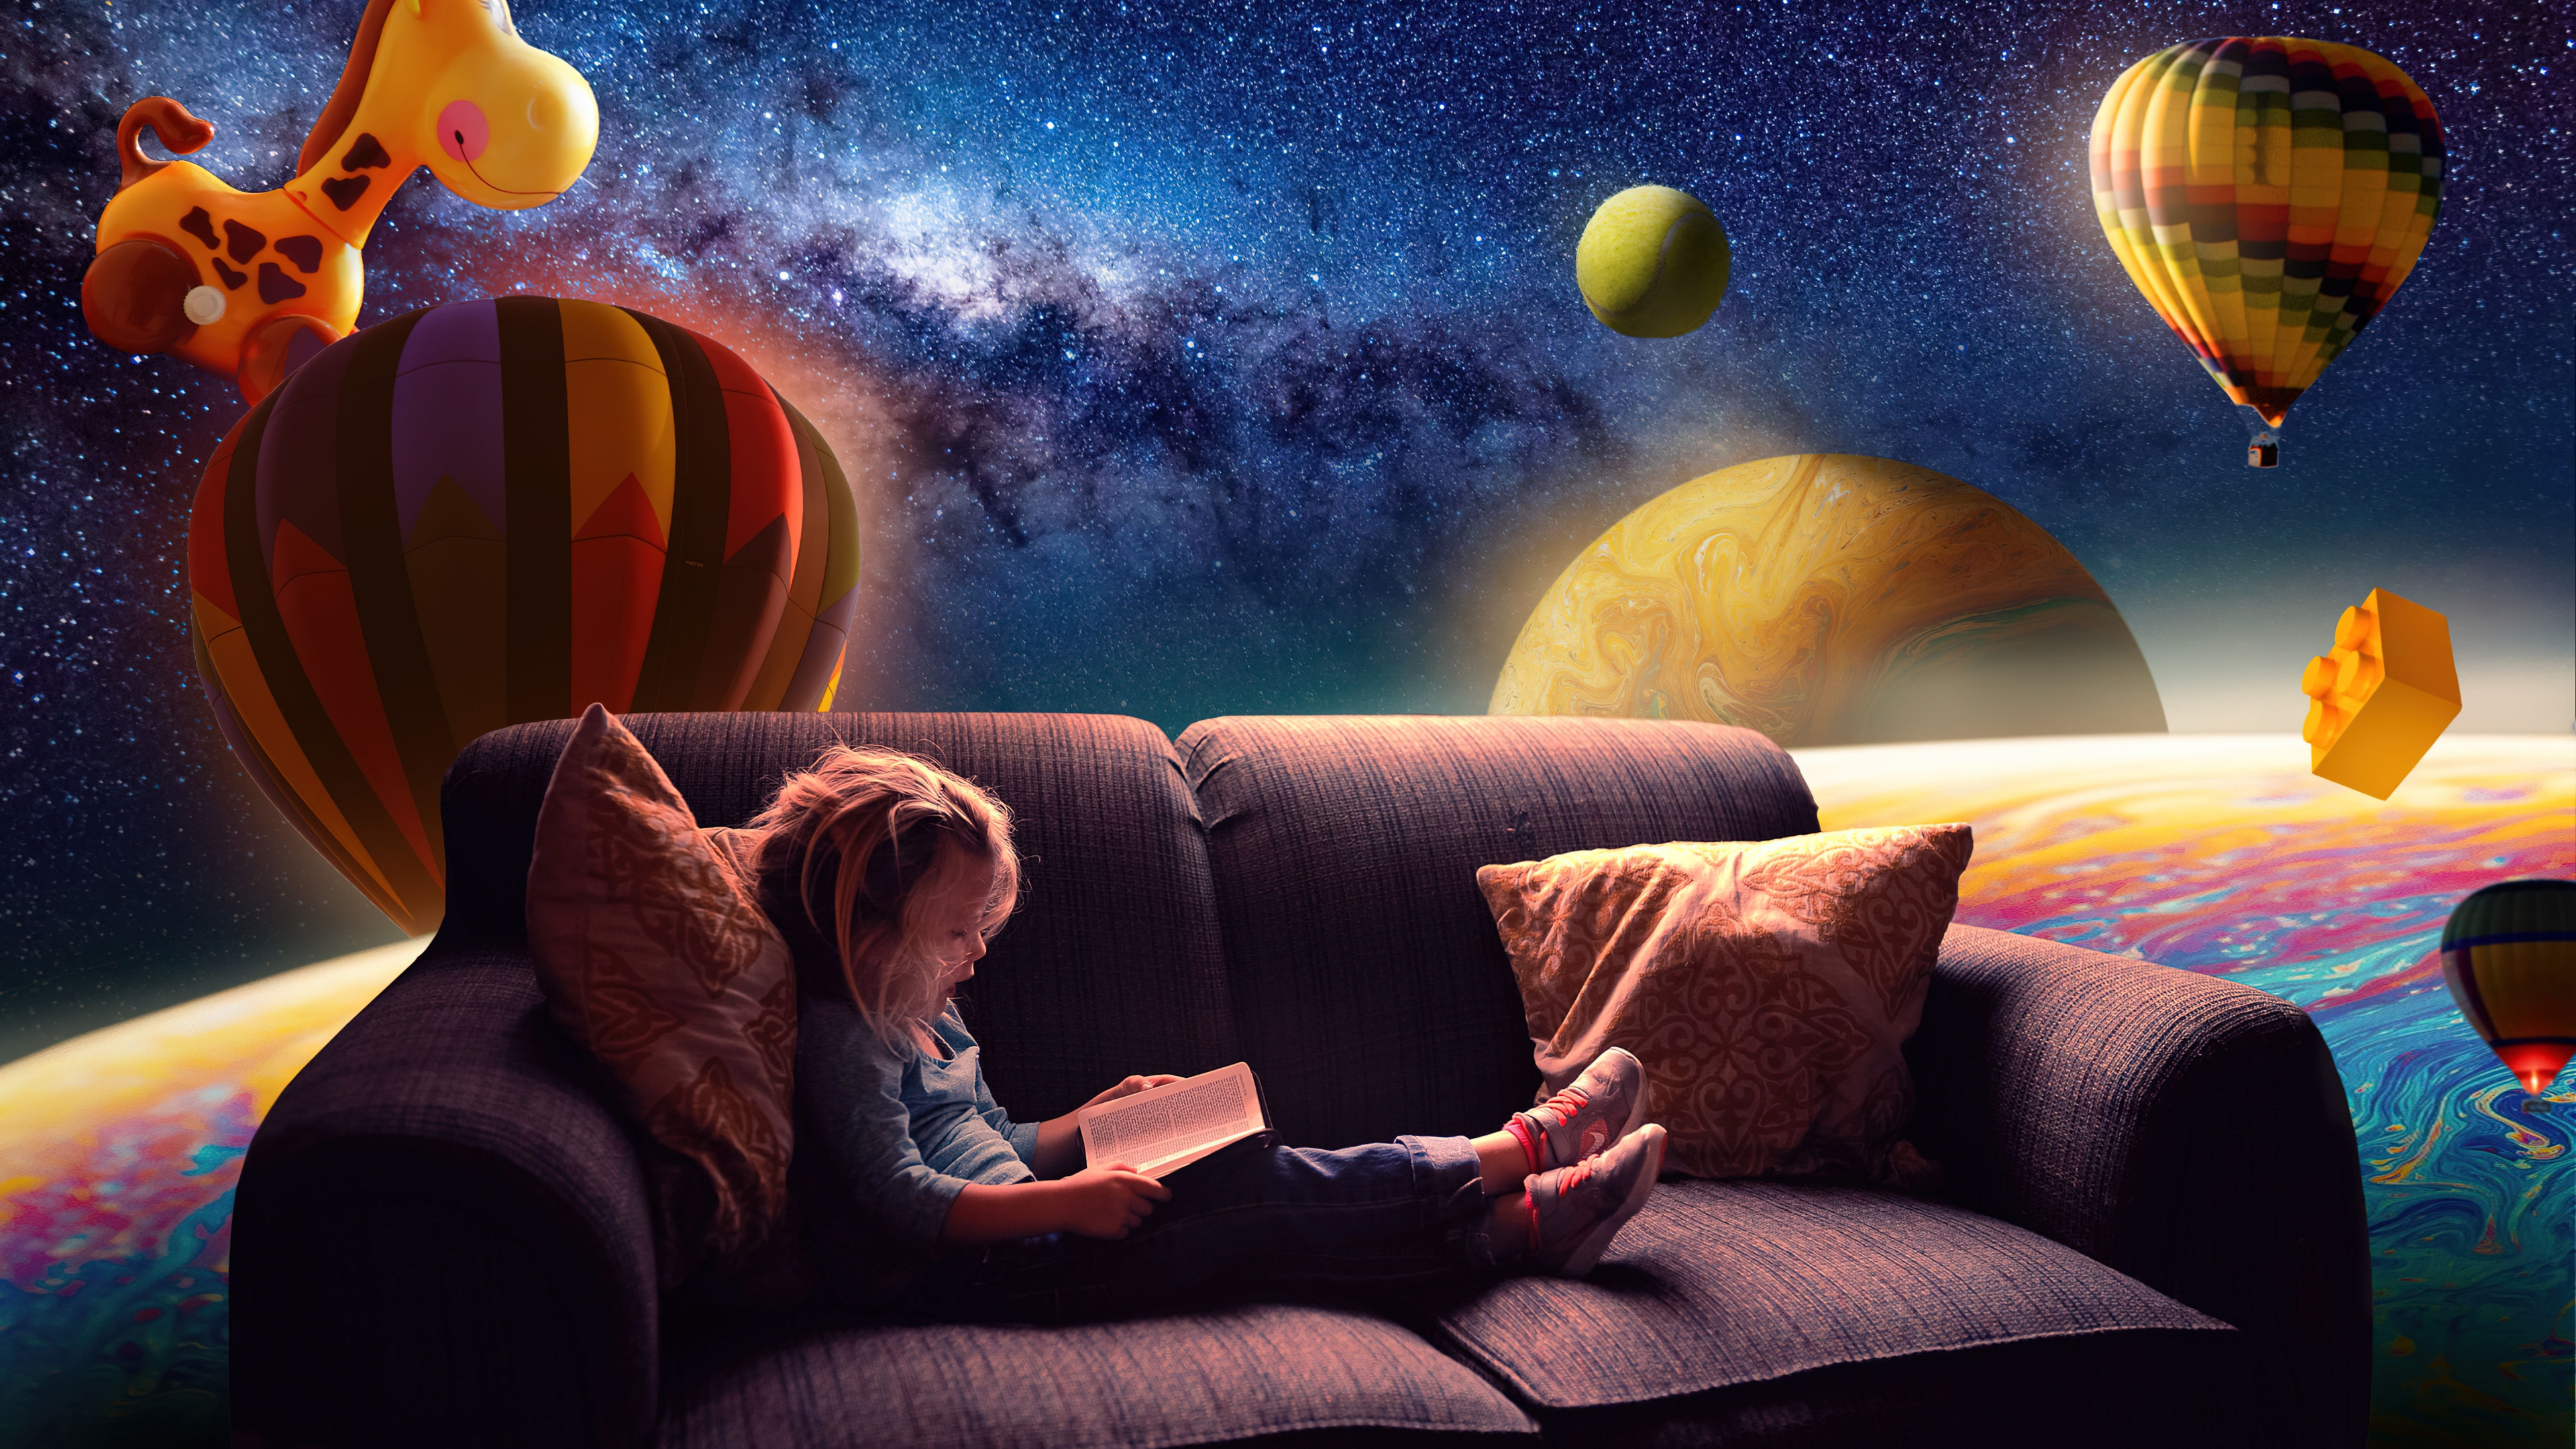 HD wallpaper, Couch, Outer Space, Hot Air Balloons, Floating, Dream, Surreal, Cute Girl, Reading Book